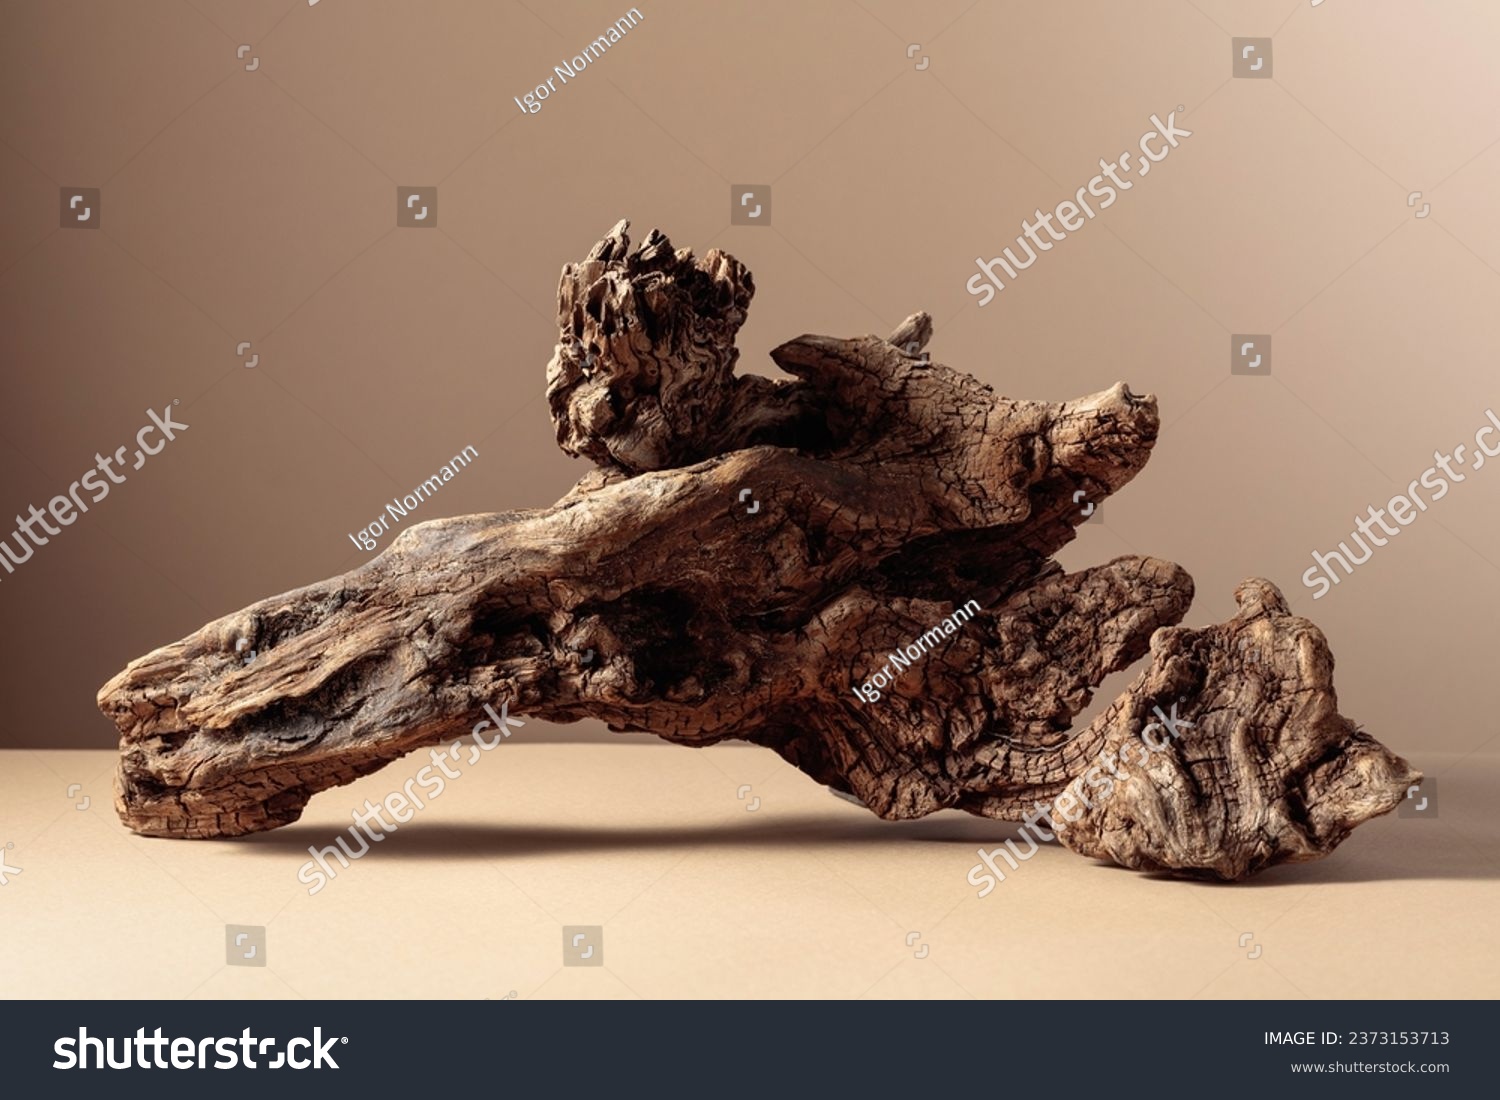 Old dry wooden snag on a beige background. Place your product in the foreground. Copy space. #2373153713